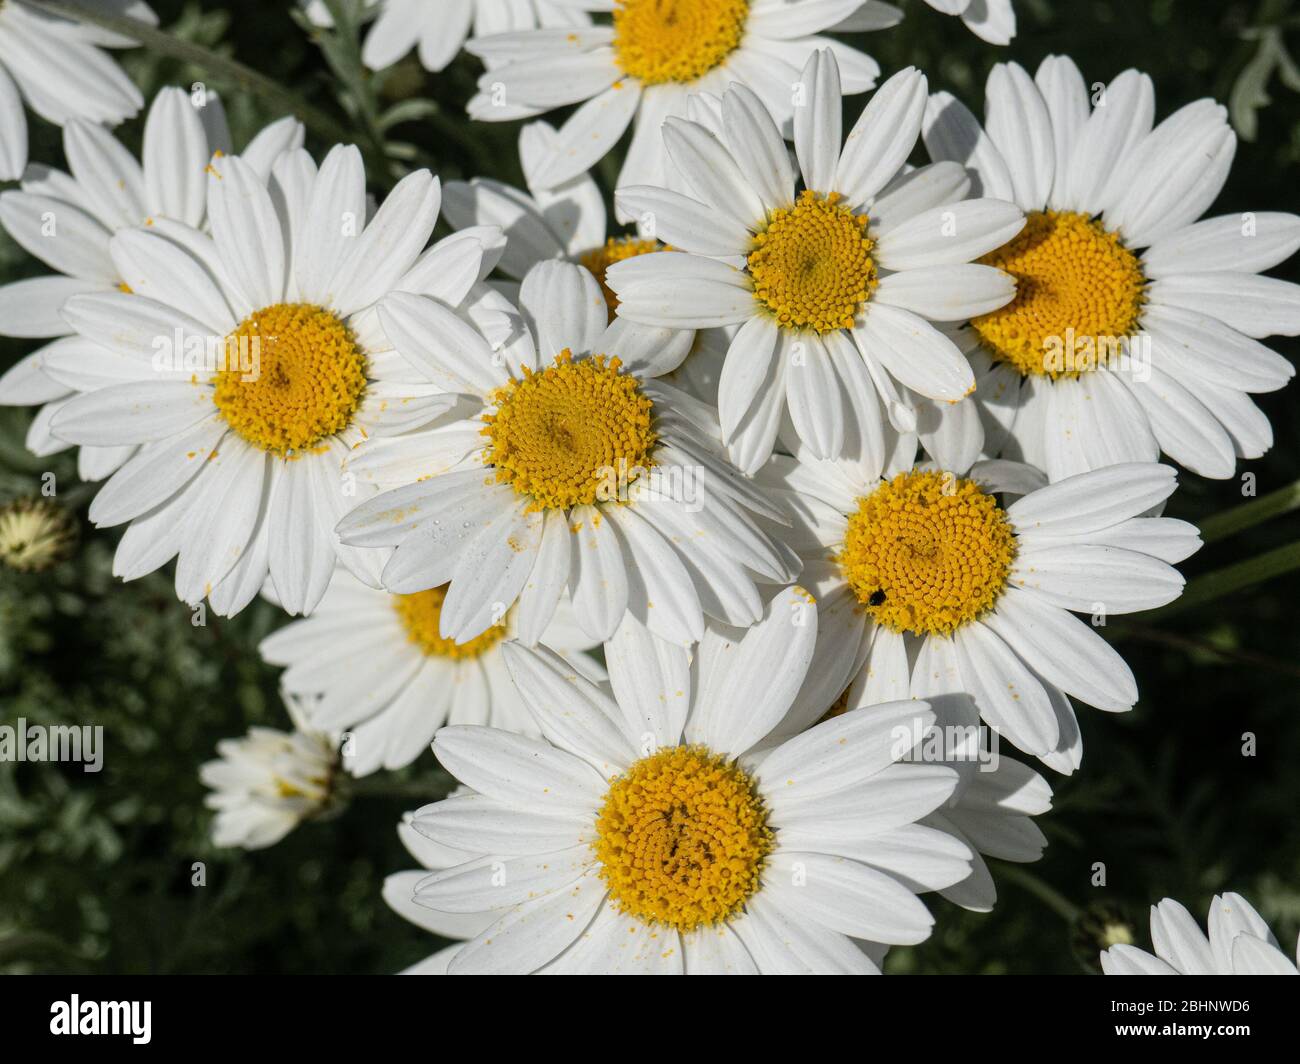 A close up of a group of the white daisy flowers of Anthemis punctata subsp. cupaniana Stock Photo